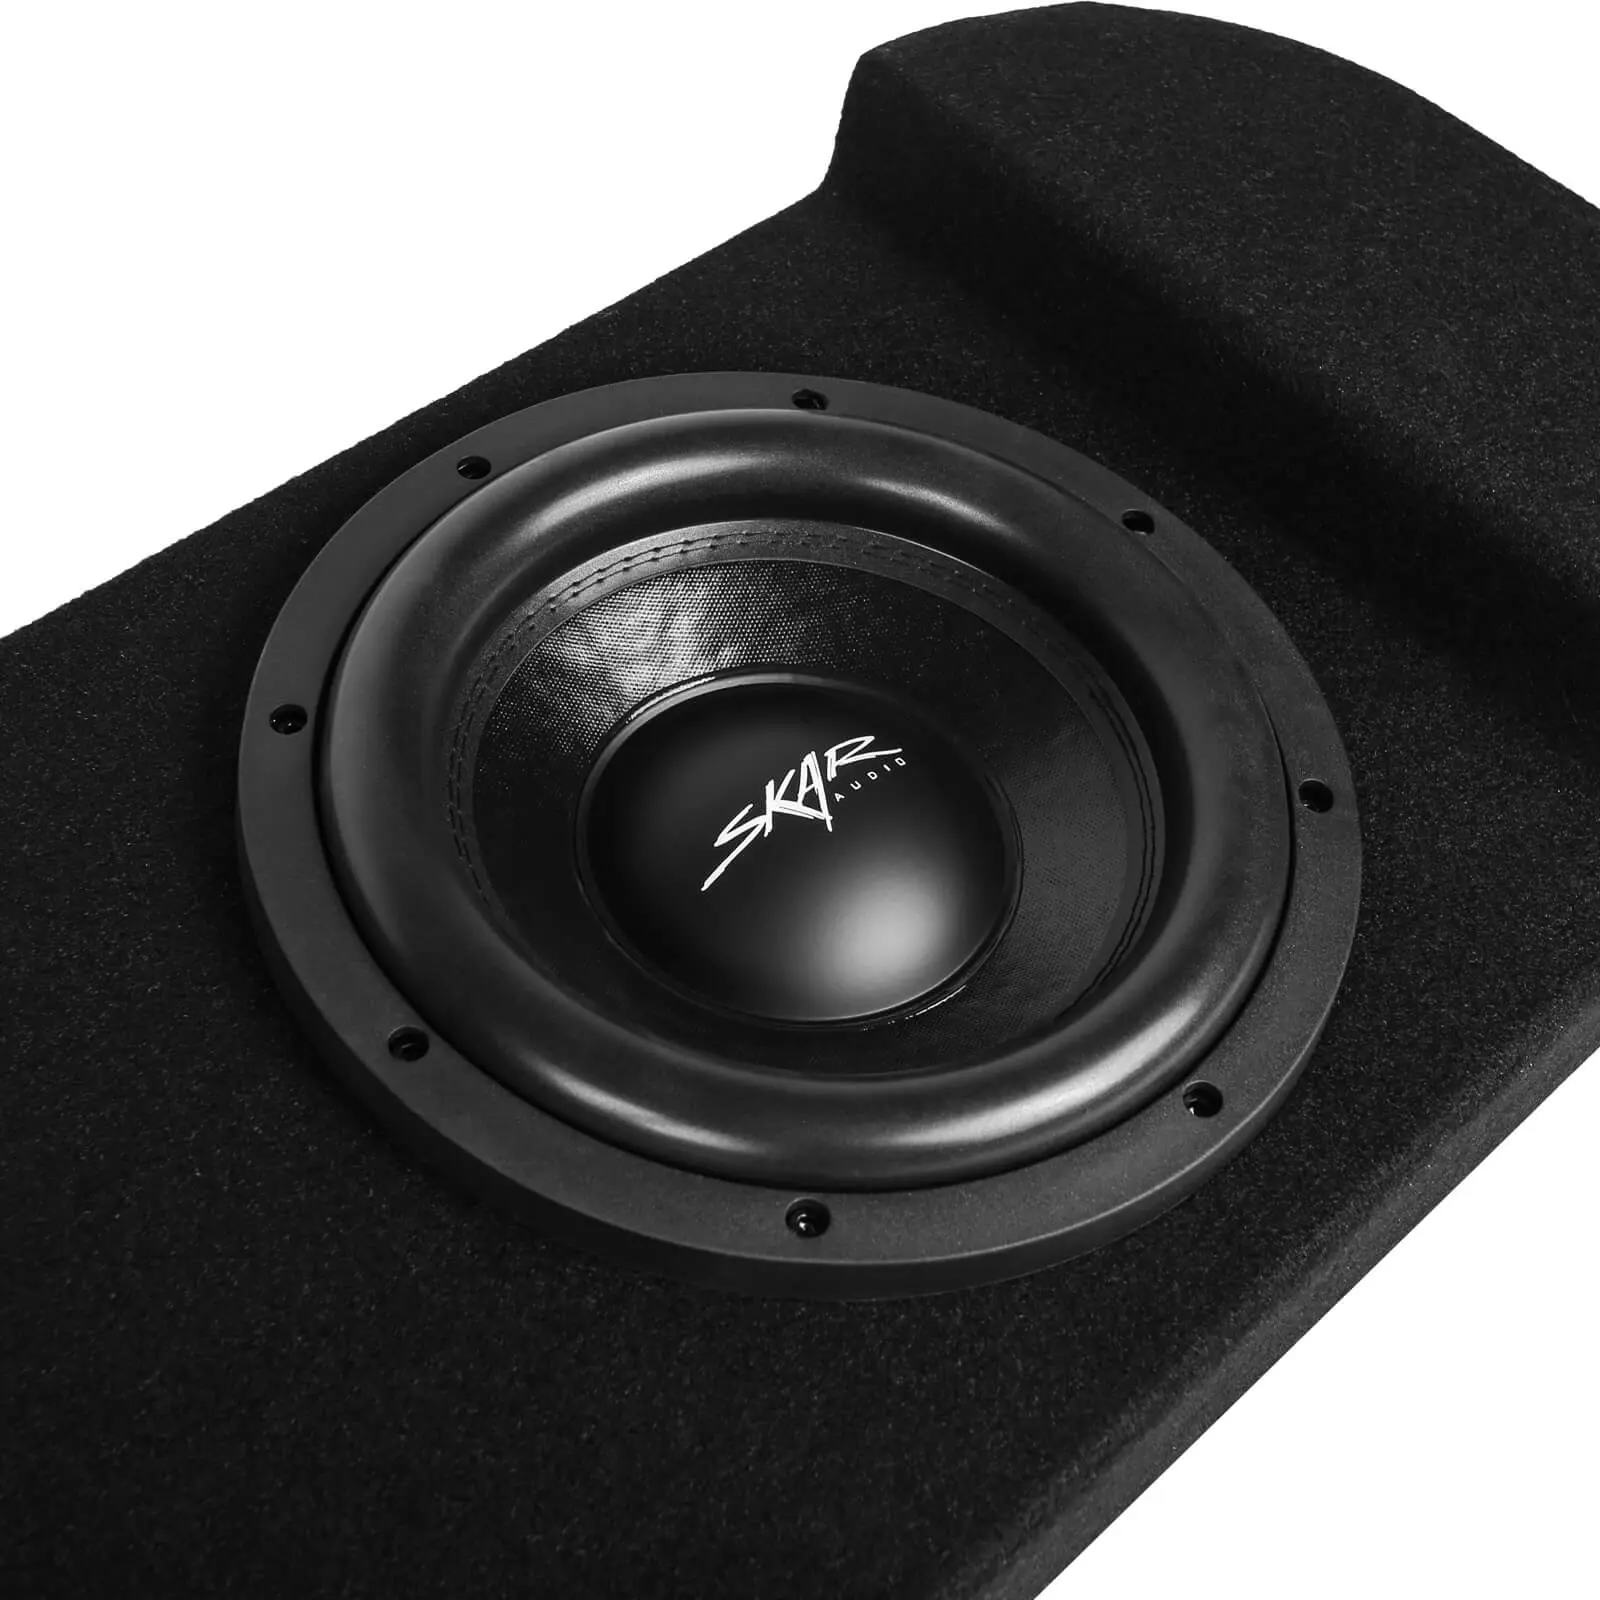 Dual 10" 1,600W Max Power Loaded Subwoofer Enclosure Compatible with 2014-2018 Chevy Silverado & GMC Sierra Crew Cab Trucks #5